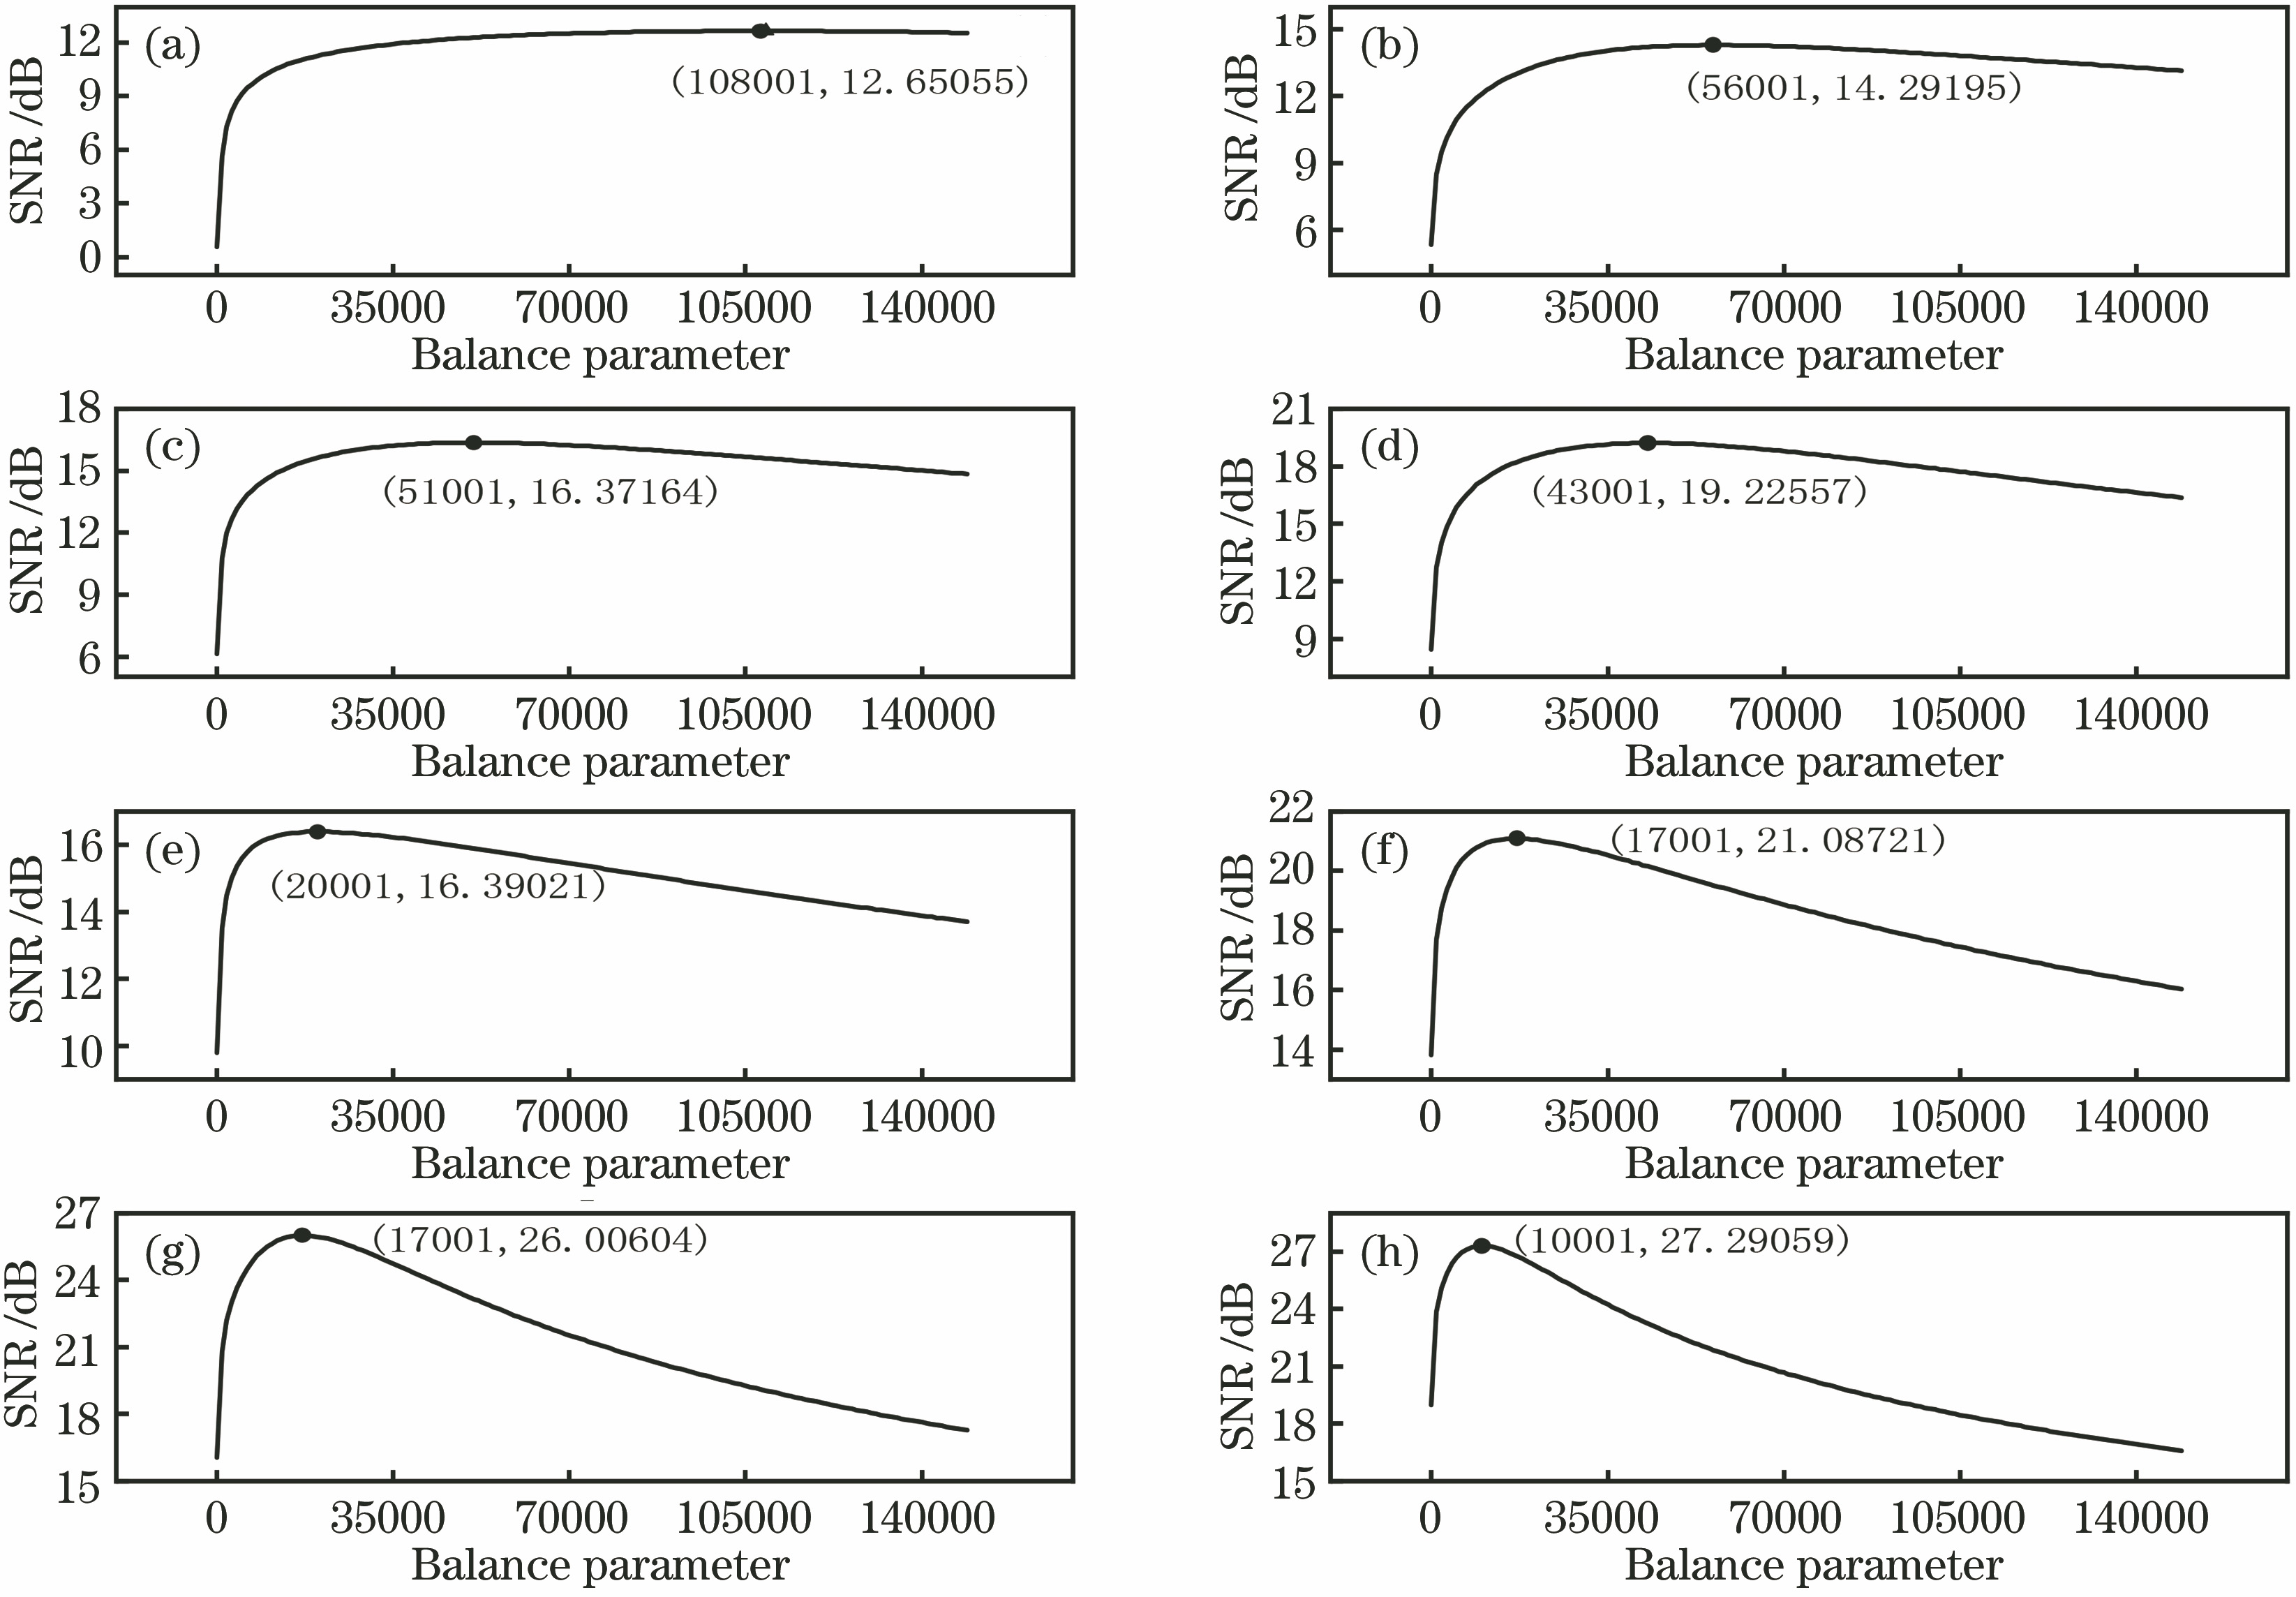 Relationship between balance parameter and SNR of the first mode component of the second harmonic signal with different noise intensity. (a) SNR of noise signal is -7.6300 dB; (b) SNR of noise signal is -4.7368 dB; (c) SNR of noise signal is -2.7133 dB; (d) SNR of noise signal is -0.3417 dB; (e) SNR of noise signal is 2.6703 dB; (f) SNR of noise signal is 4.7096 dB; (g) SNR of noise signal is 7.1441 dB; (h) SNR of noise signal is 10.1235 dB